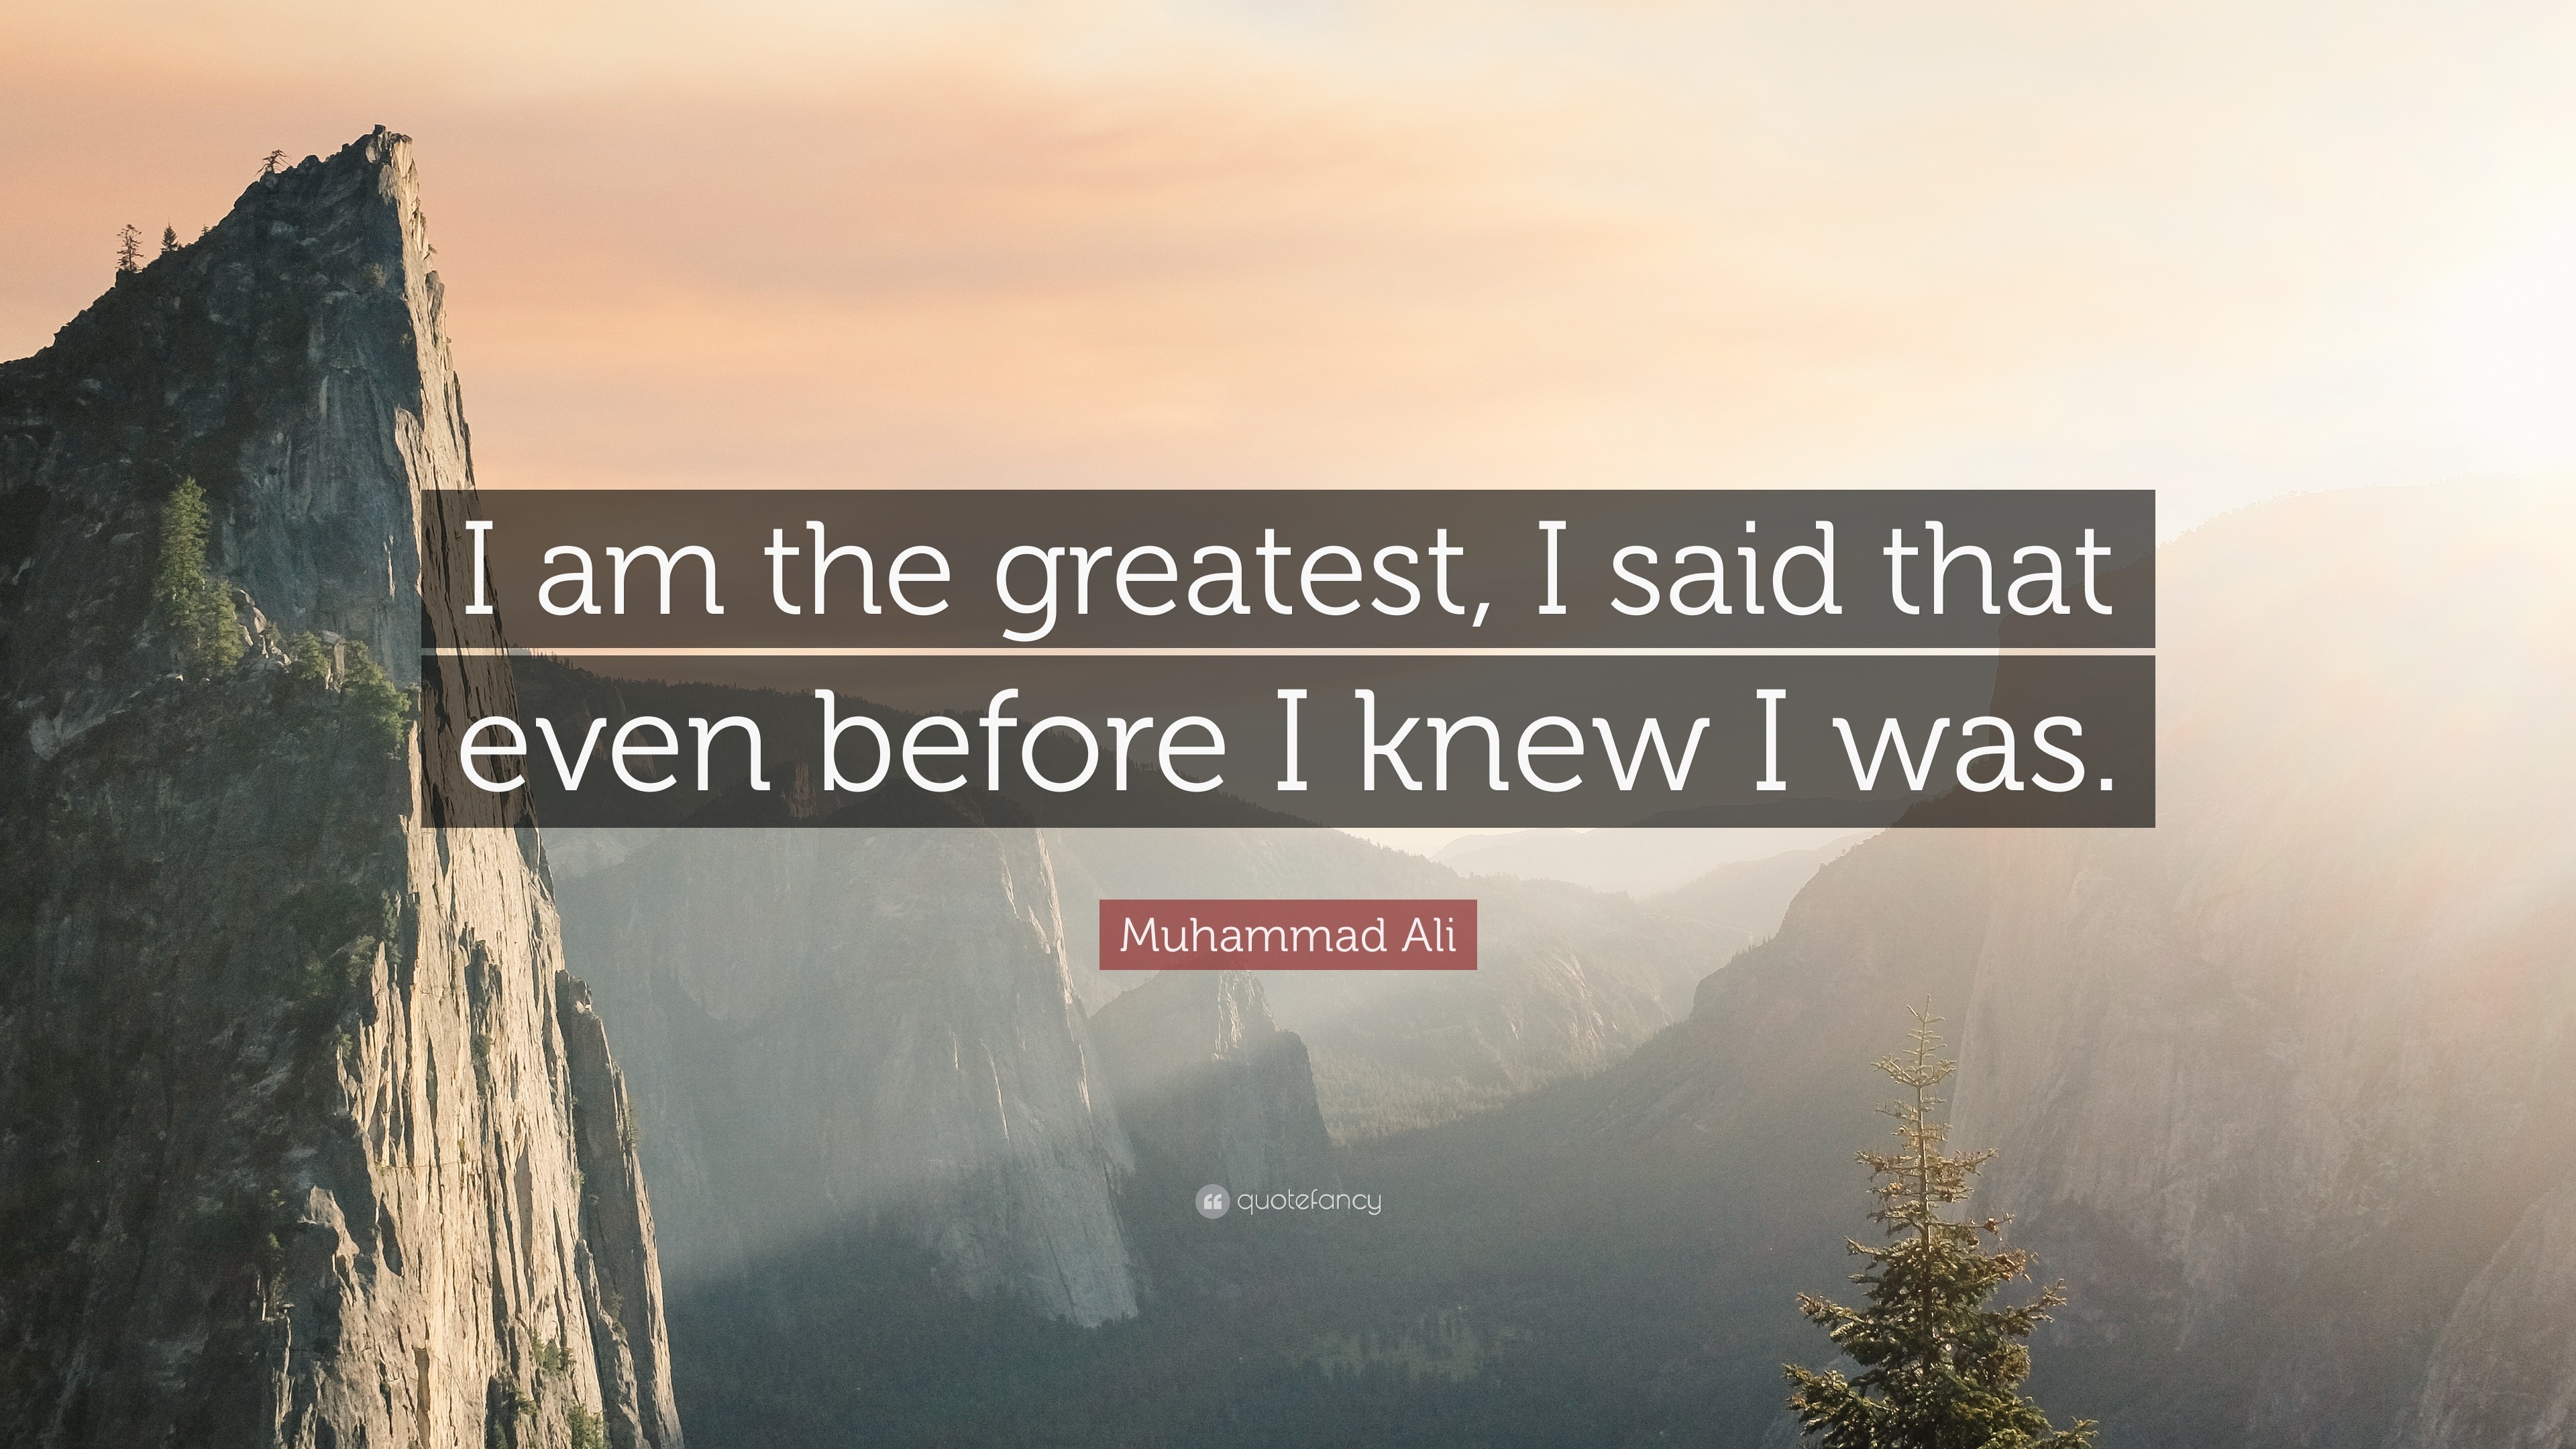 Muhammad Ali Quote: “I am the greatest, I said that even before I knew